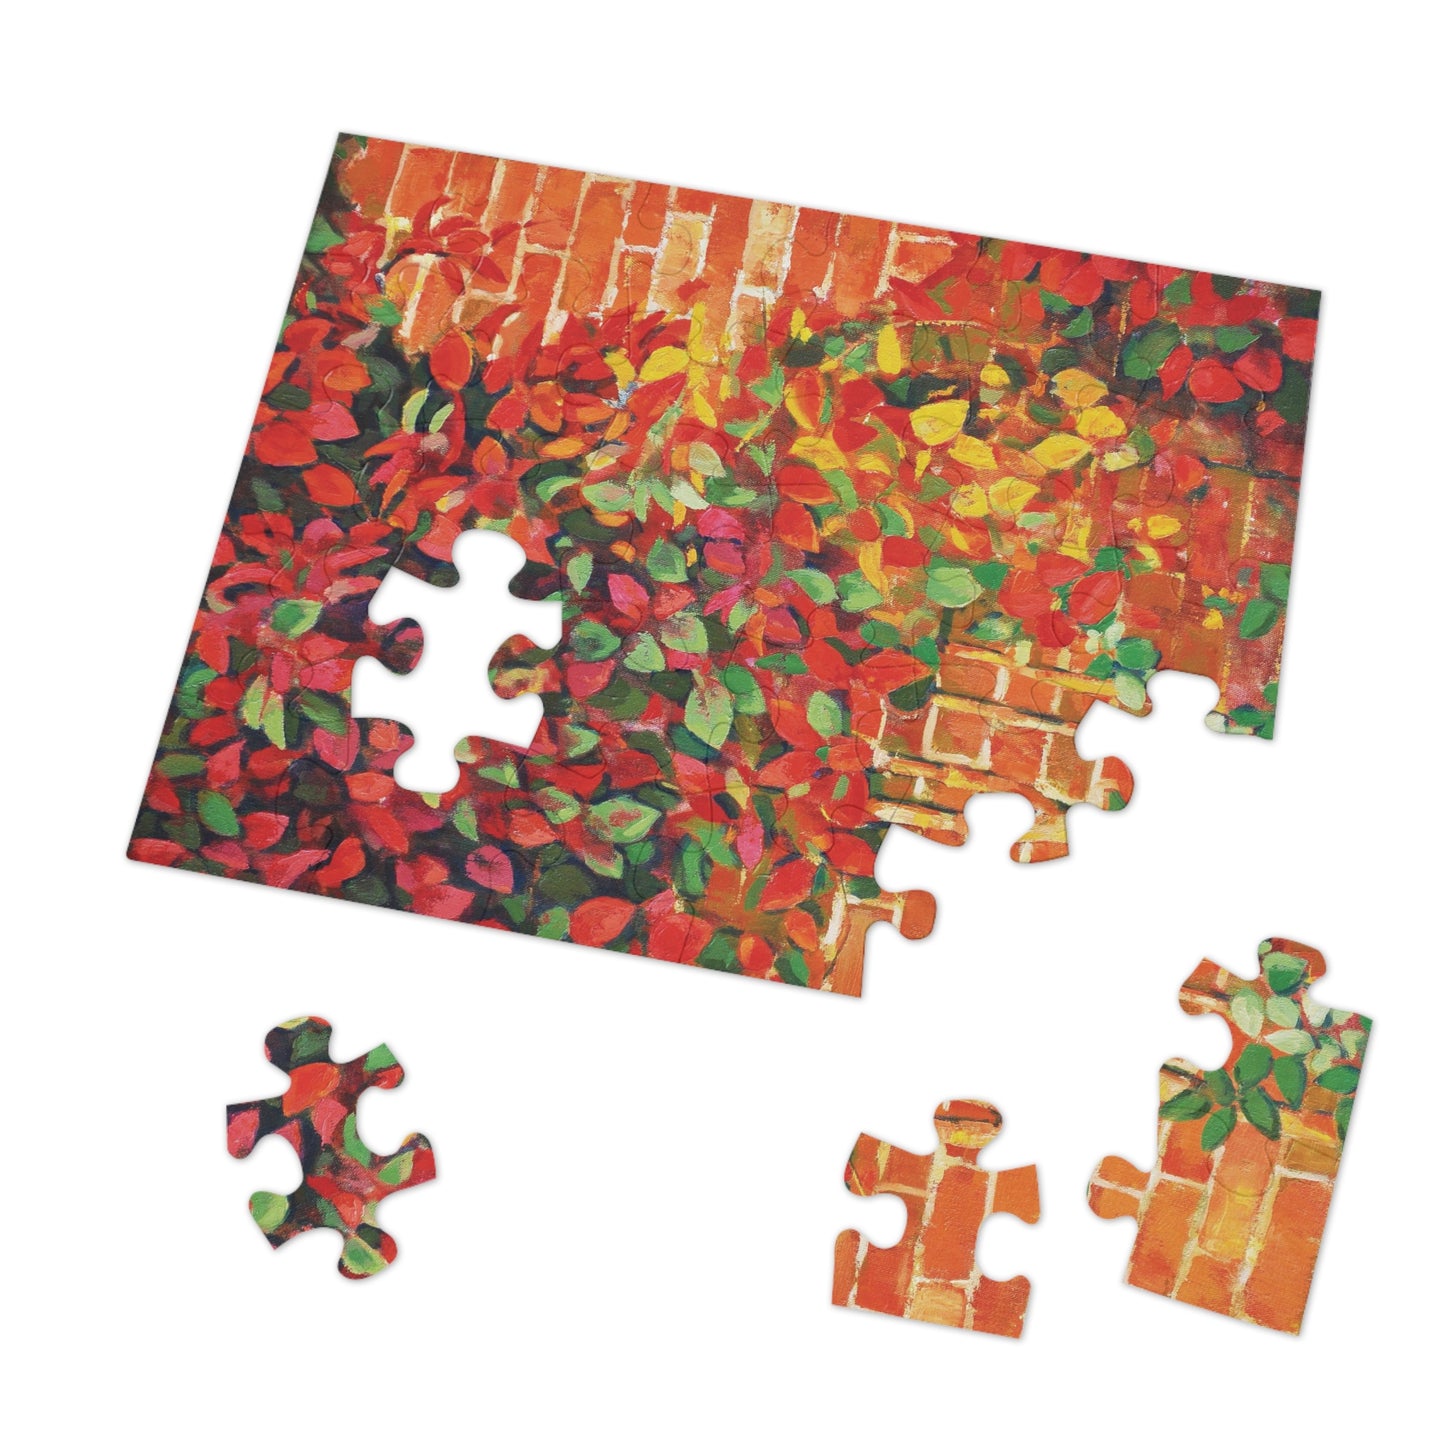 Jigsaw Puzzle - Impression on the Wall